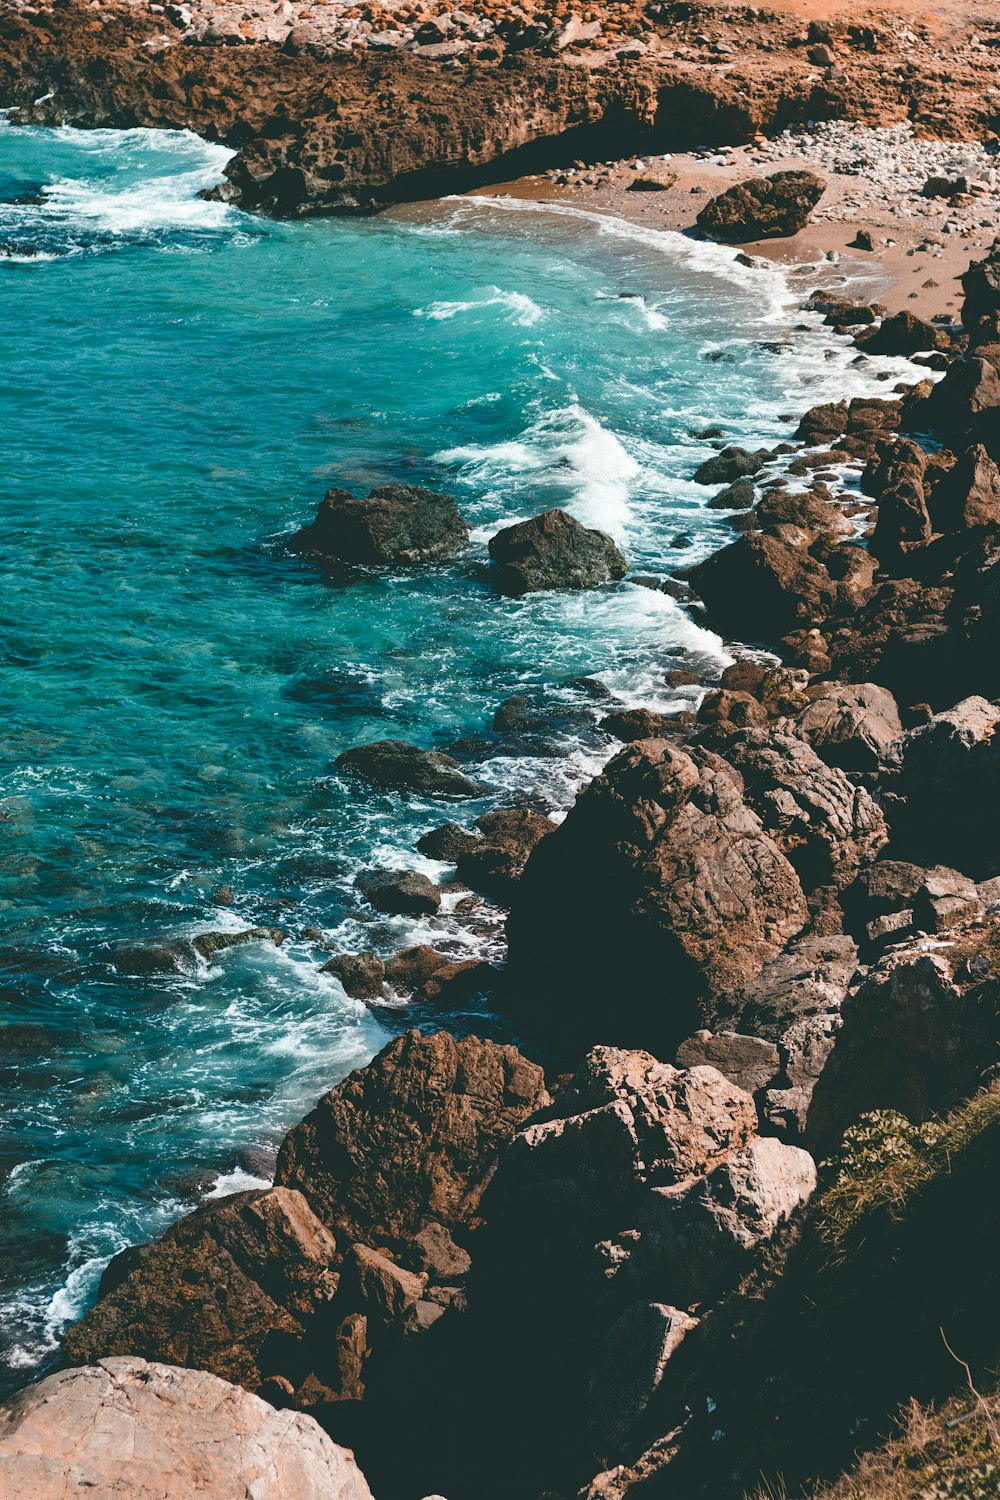 brown rocky shore with ocean waves crashing on rocks during daytime